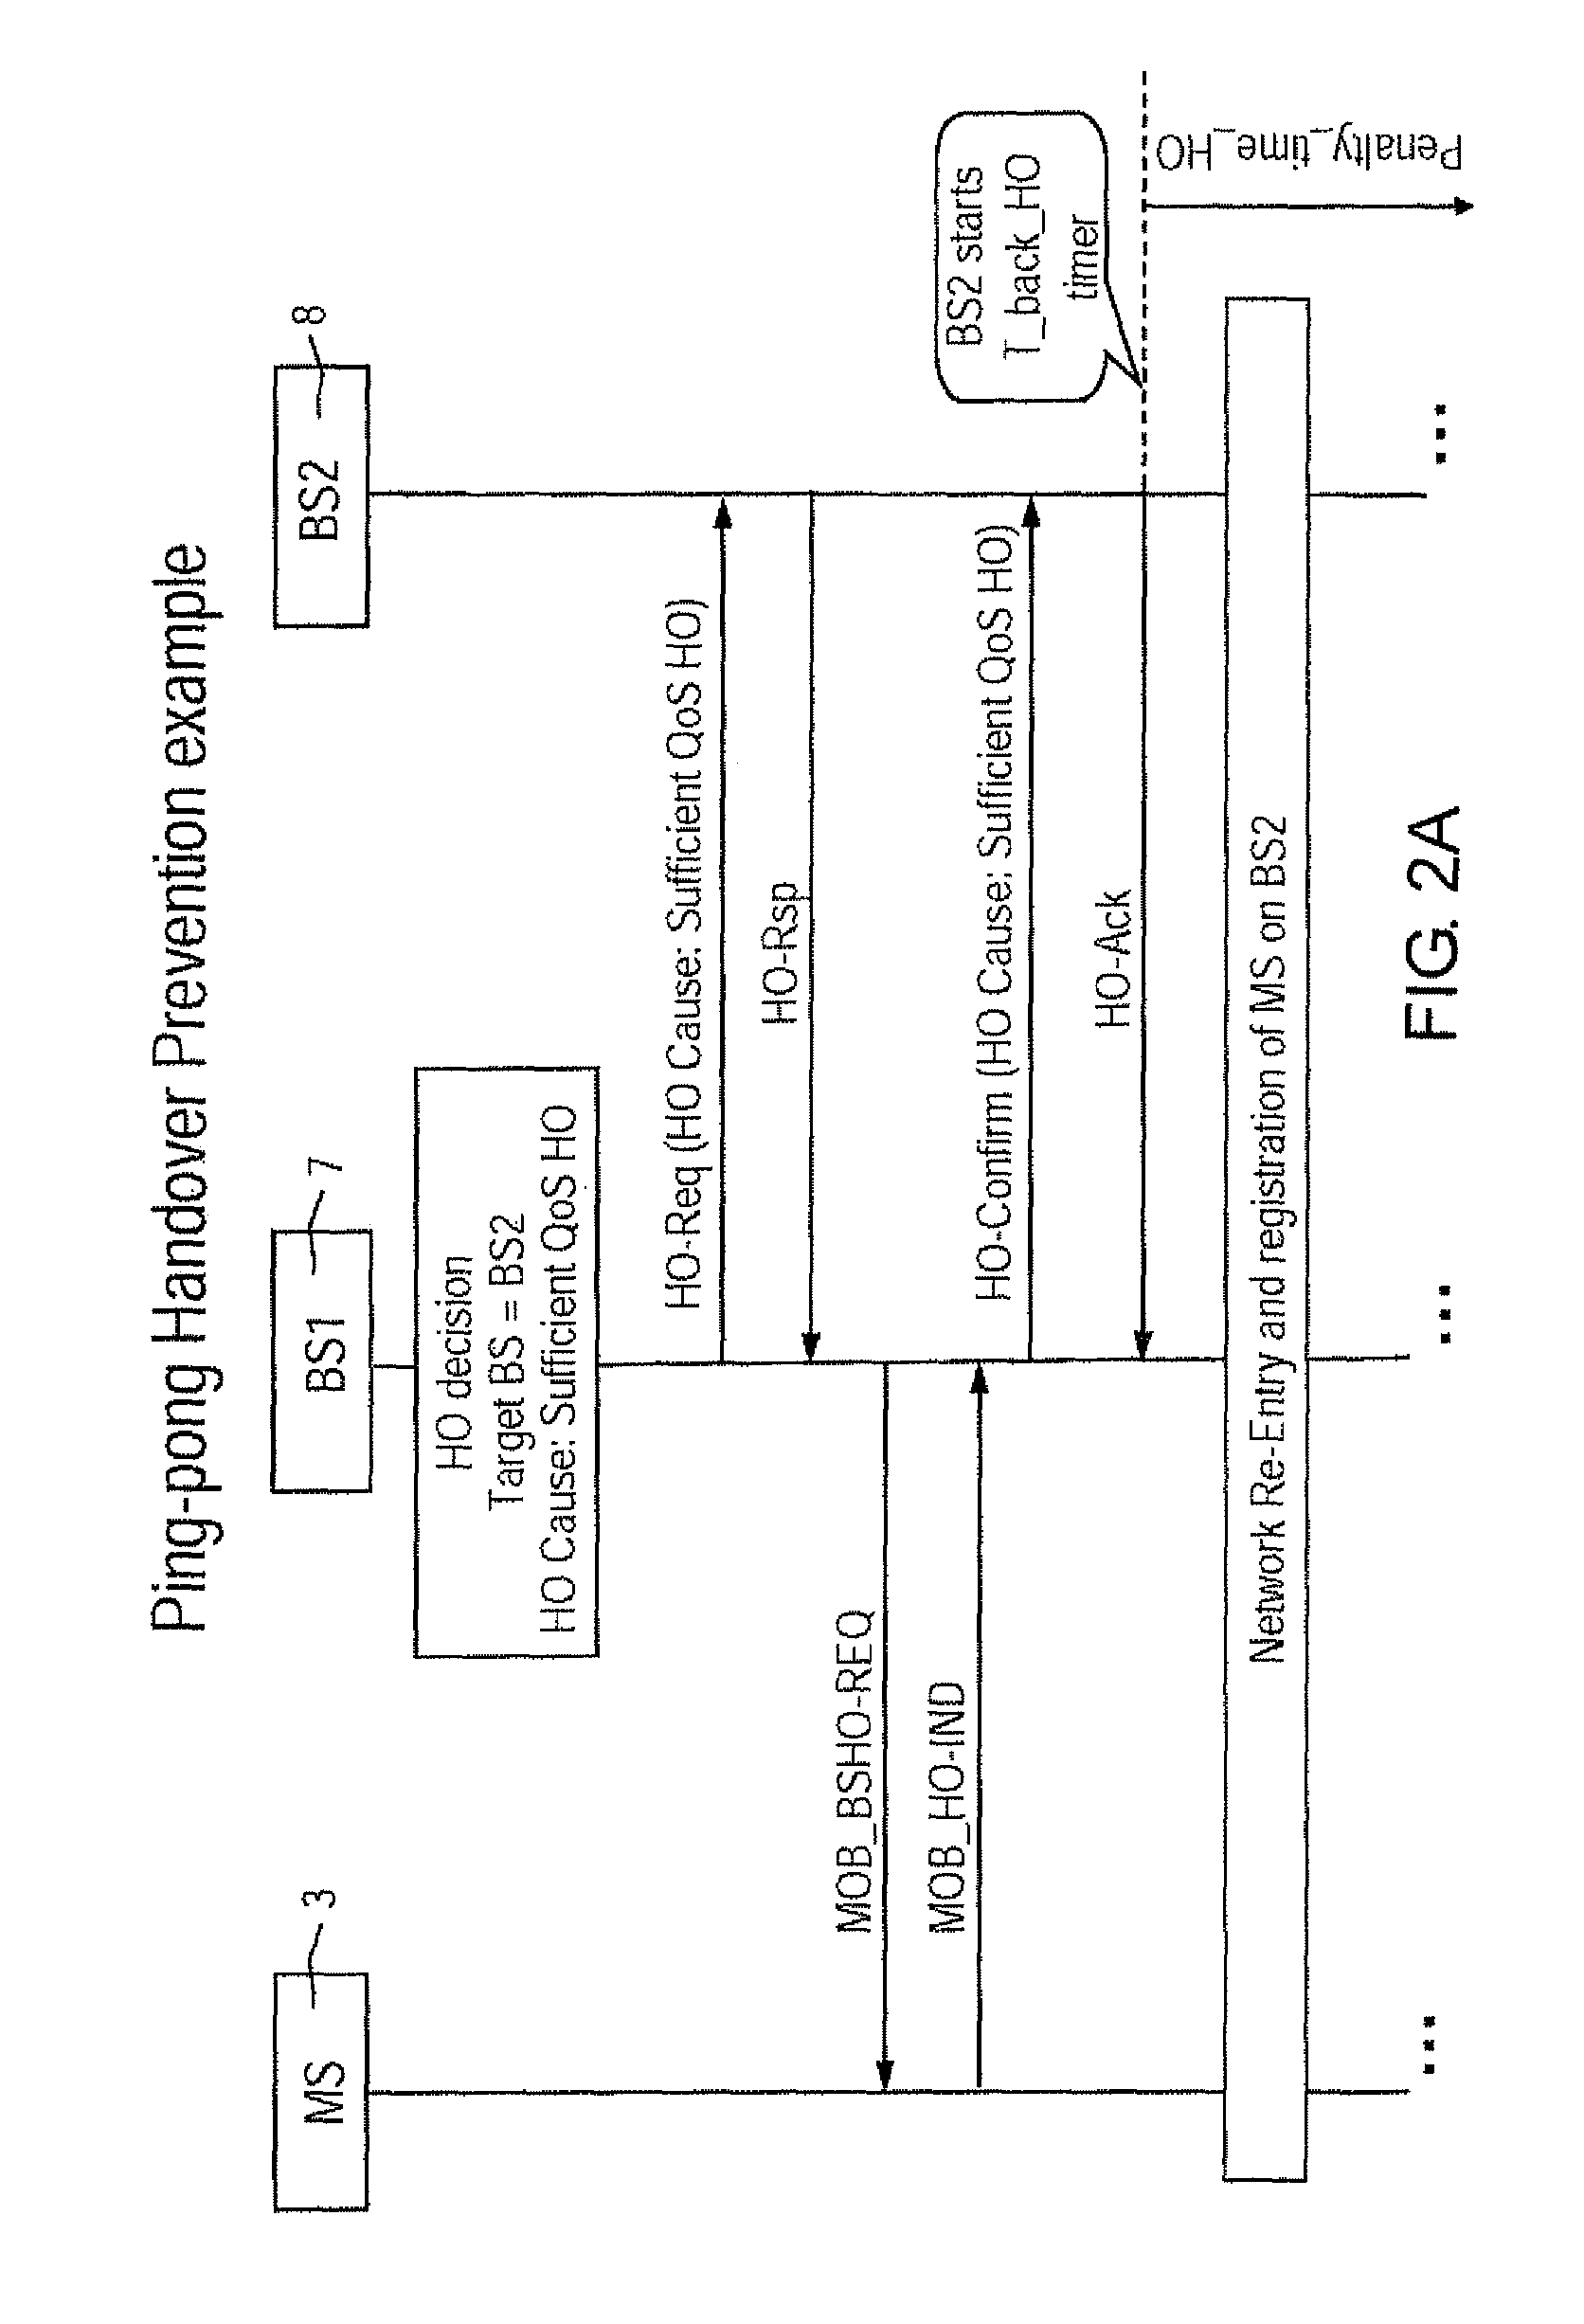 Method for preventing ping-pong handover effect in mobile WiMAX networks